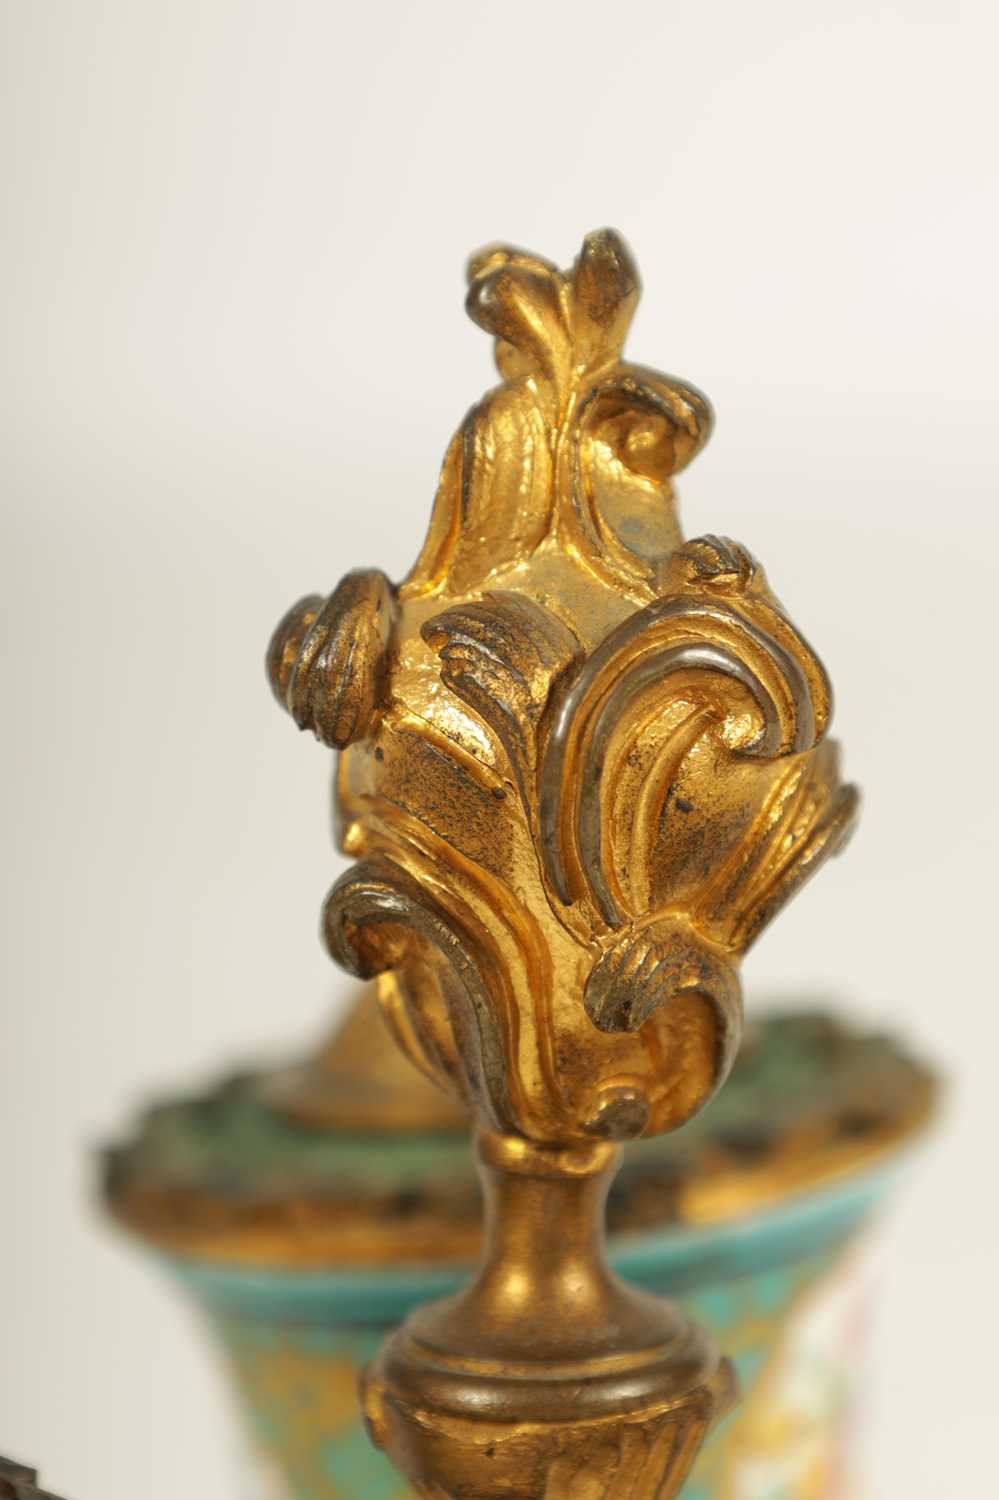 A 18TH CENTURY FRENCH ROCOCO ORMOLU AND SERVES STYLE TRIPLE INKSTAND - Image 4 of 10